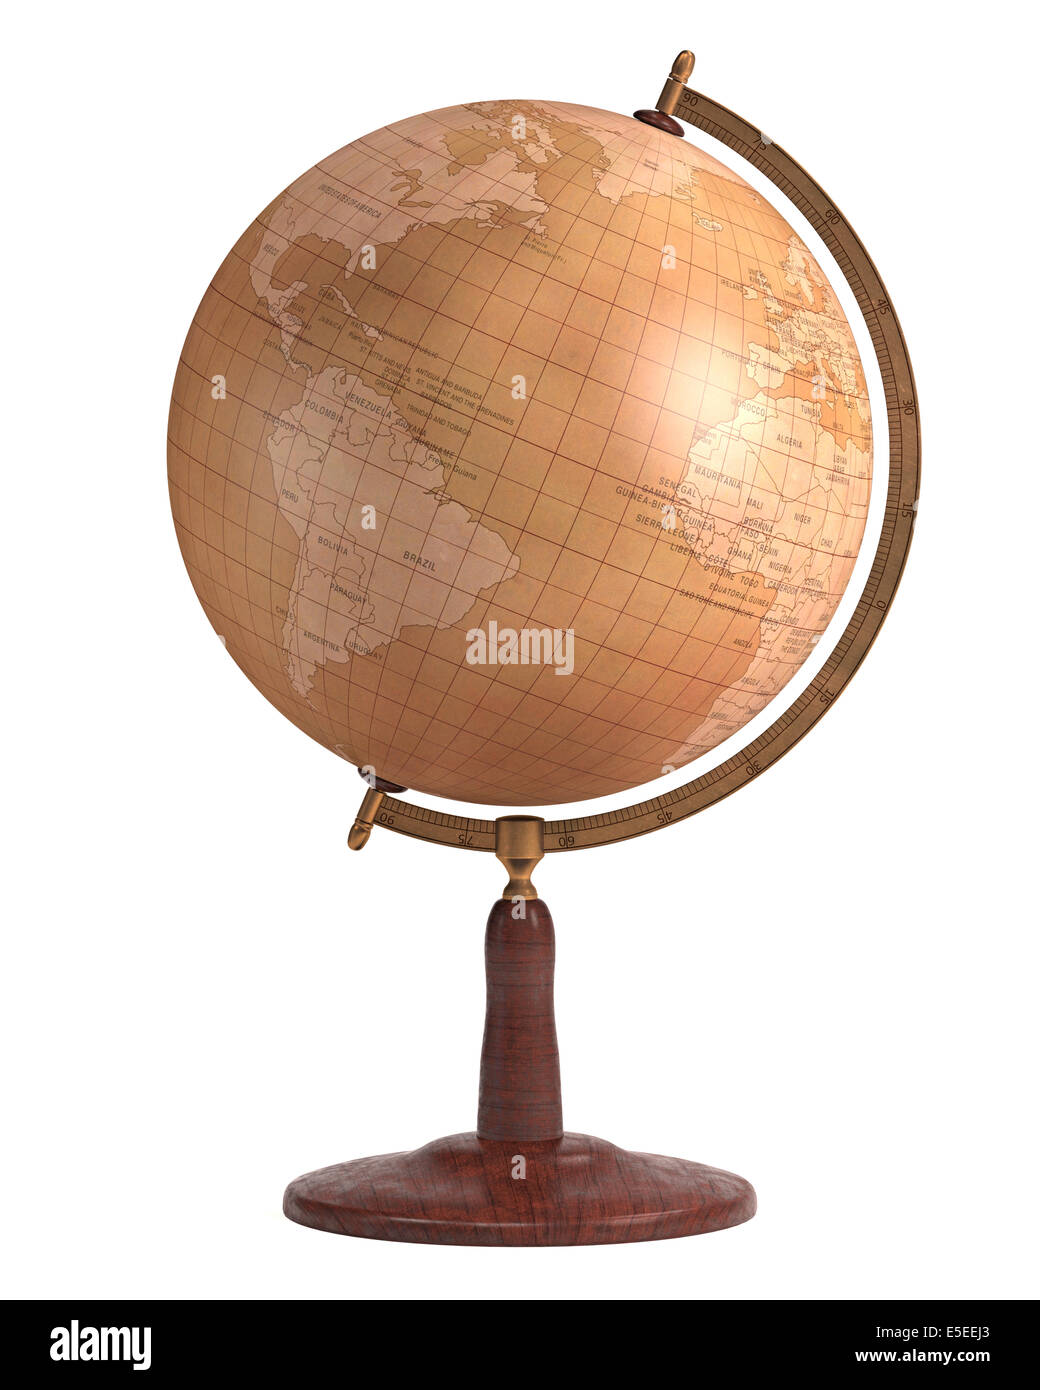 Antique globe on white background with clipping path included. Stock Photo